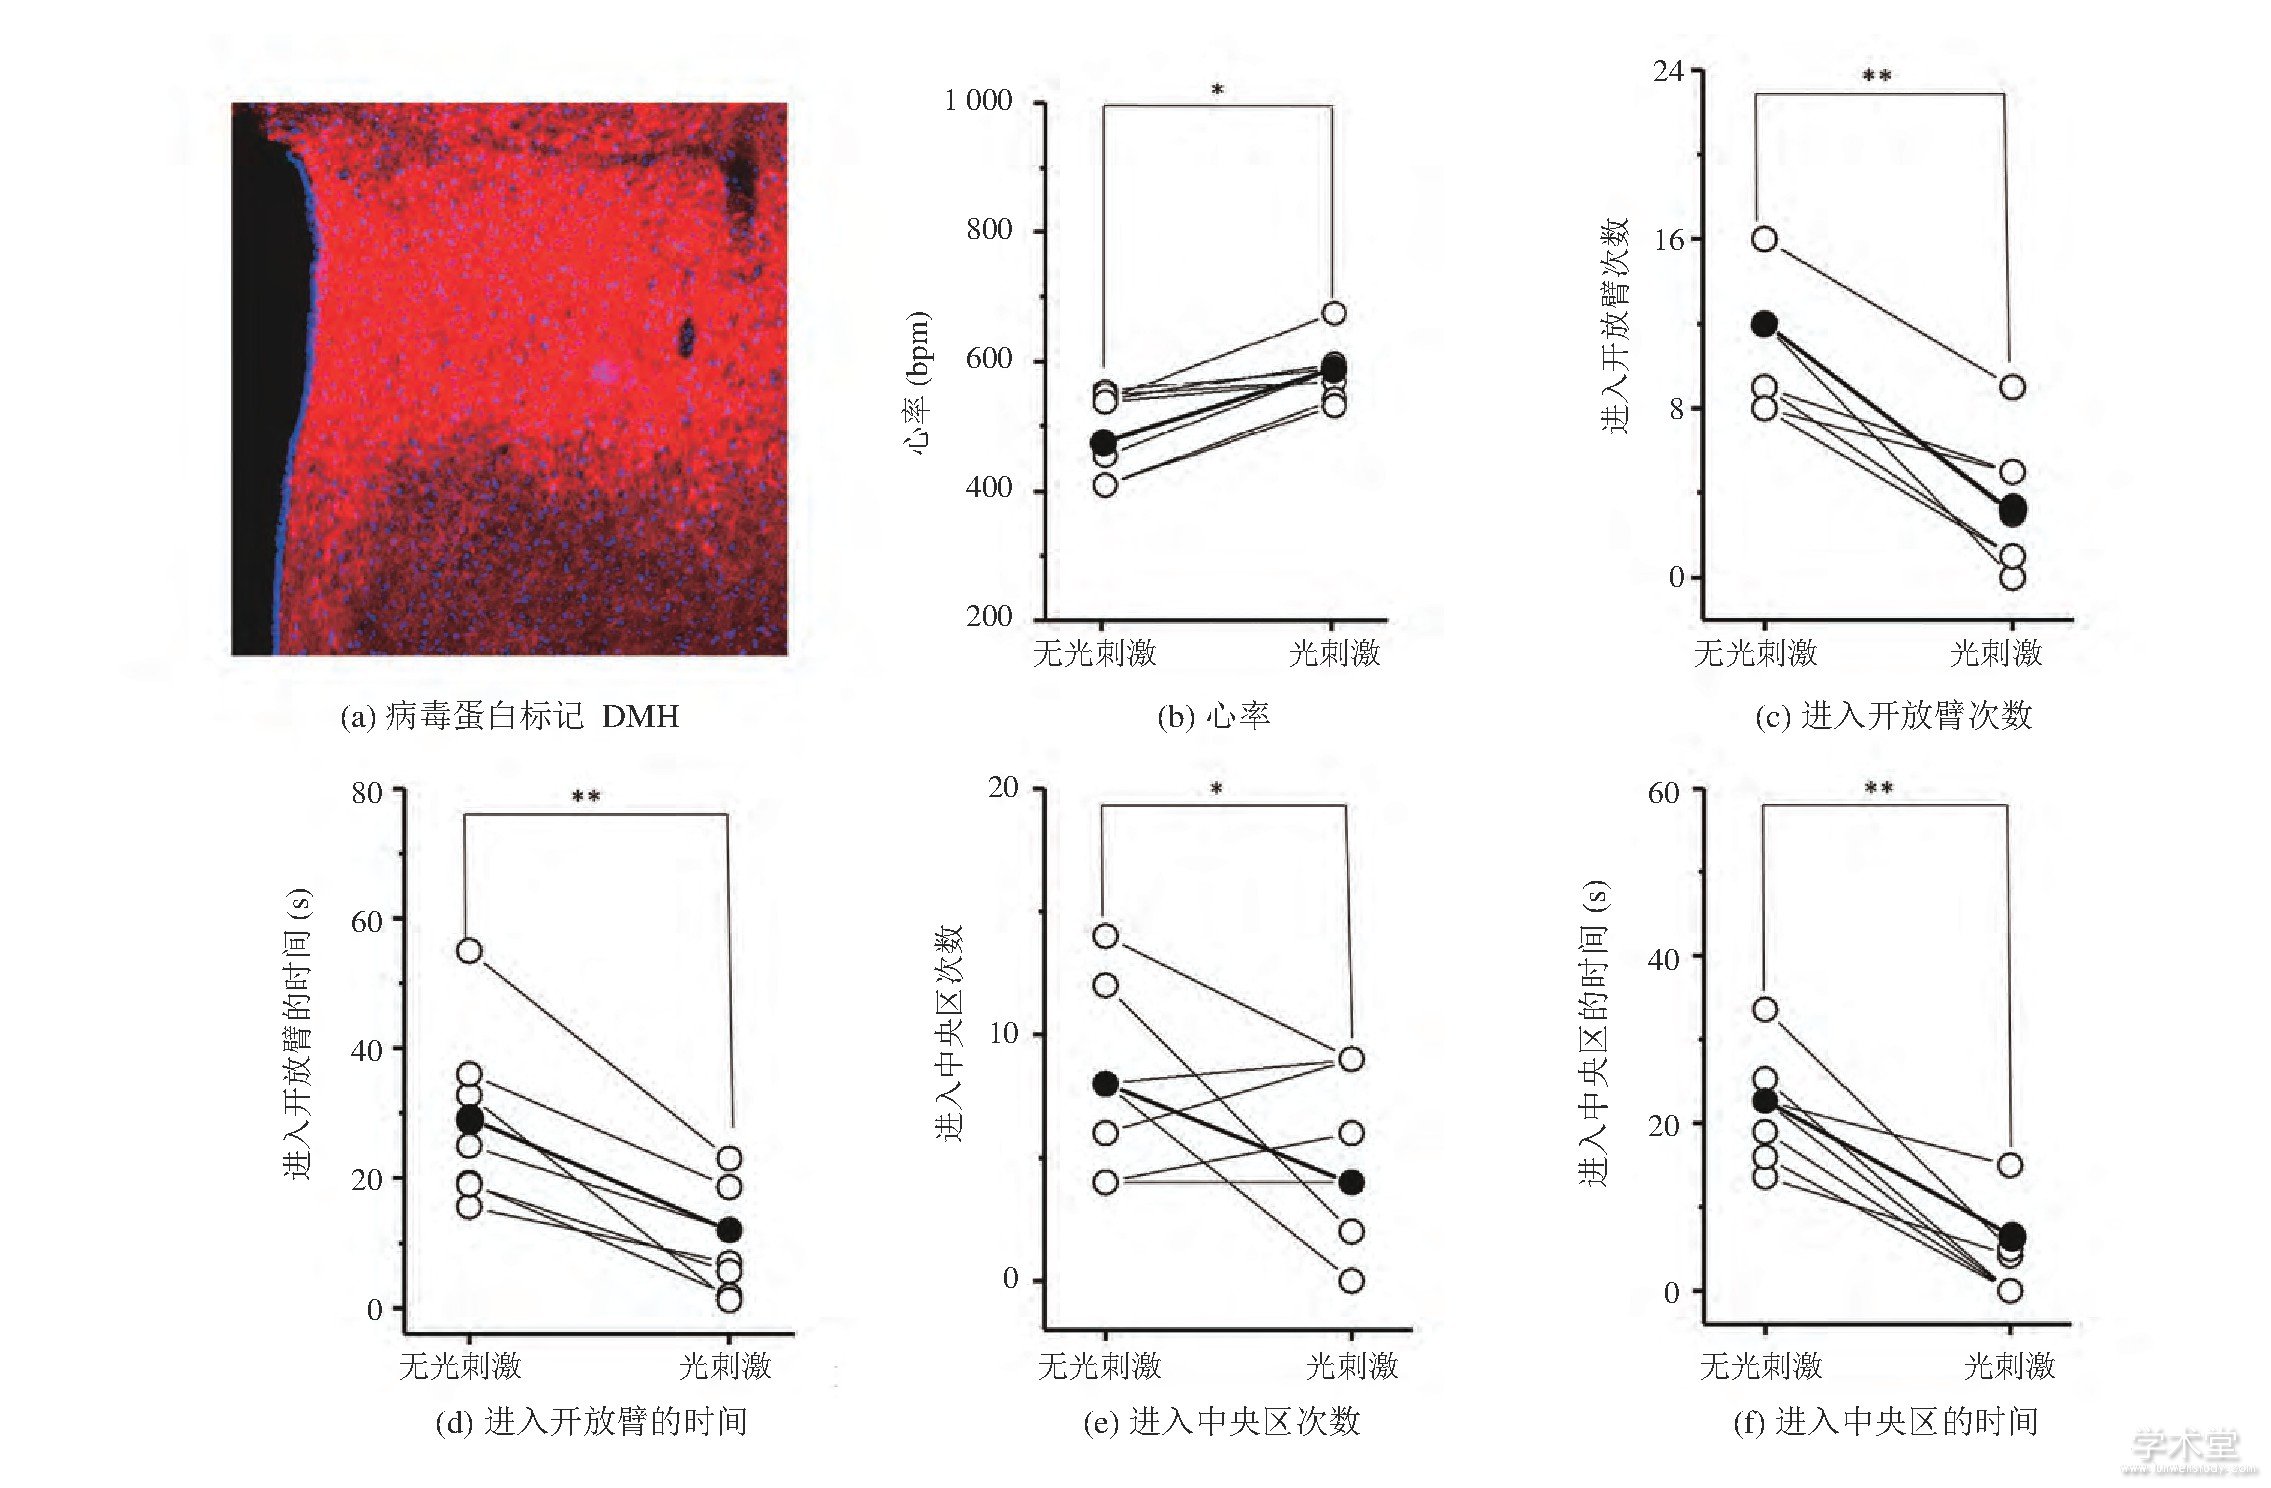 ͼ3 GAD-creСڹŴ˷DMH GABAԪǰʺΪ仯 (*P0.05, **P0.01, t-)Fig.3 Heart rate and behavior changes of GAD-cre mice before and during optogenetic excitation of DMH GABAergic neurons (*P<0.05, **P<0.01, Paired t-Test)